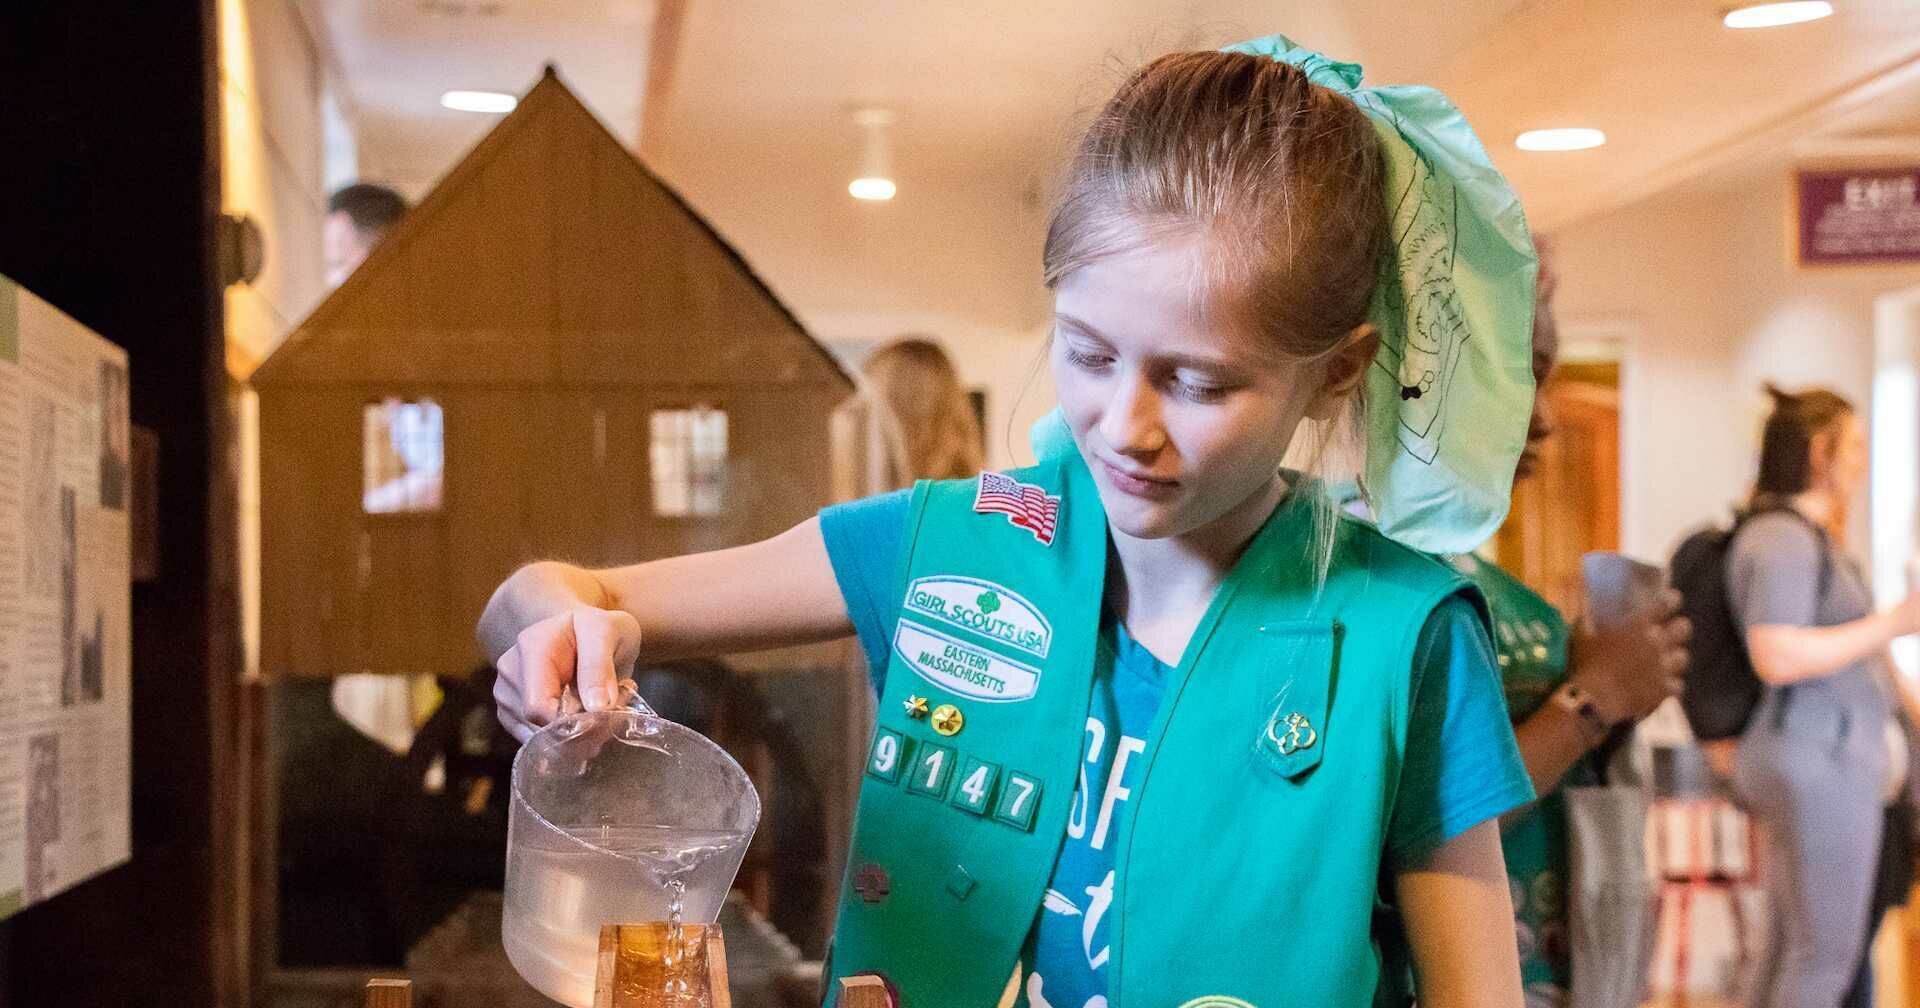 Scout pours water in educational activity